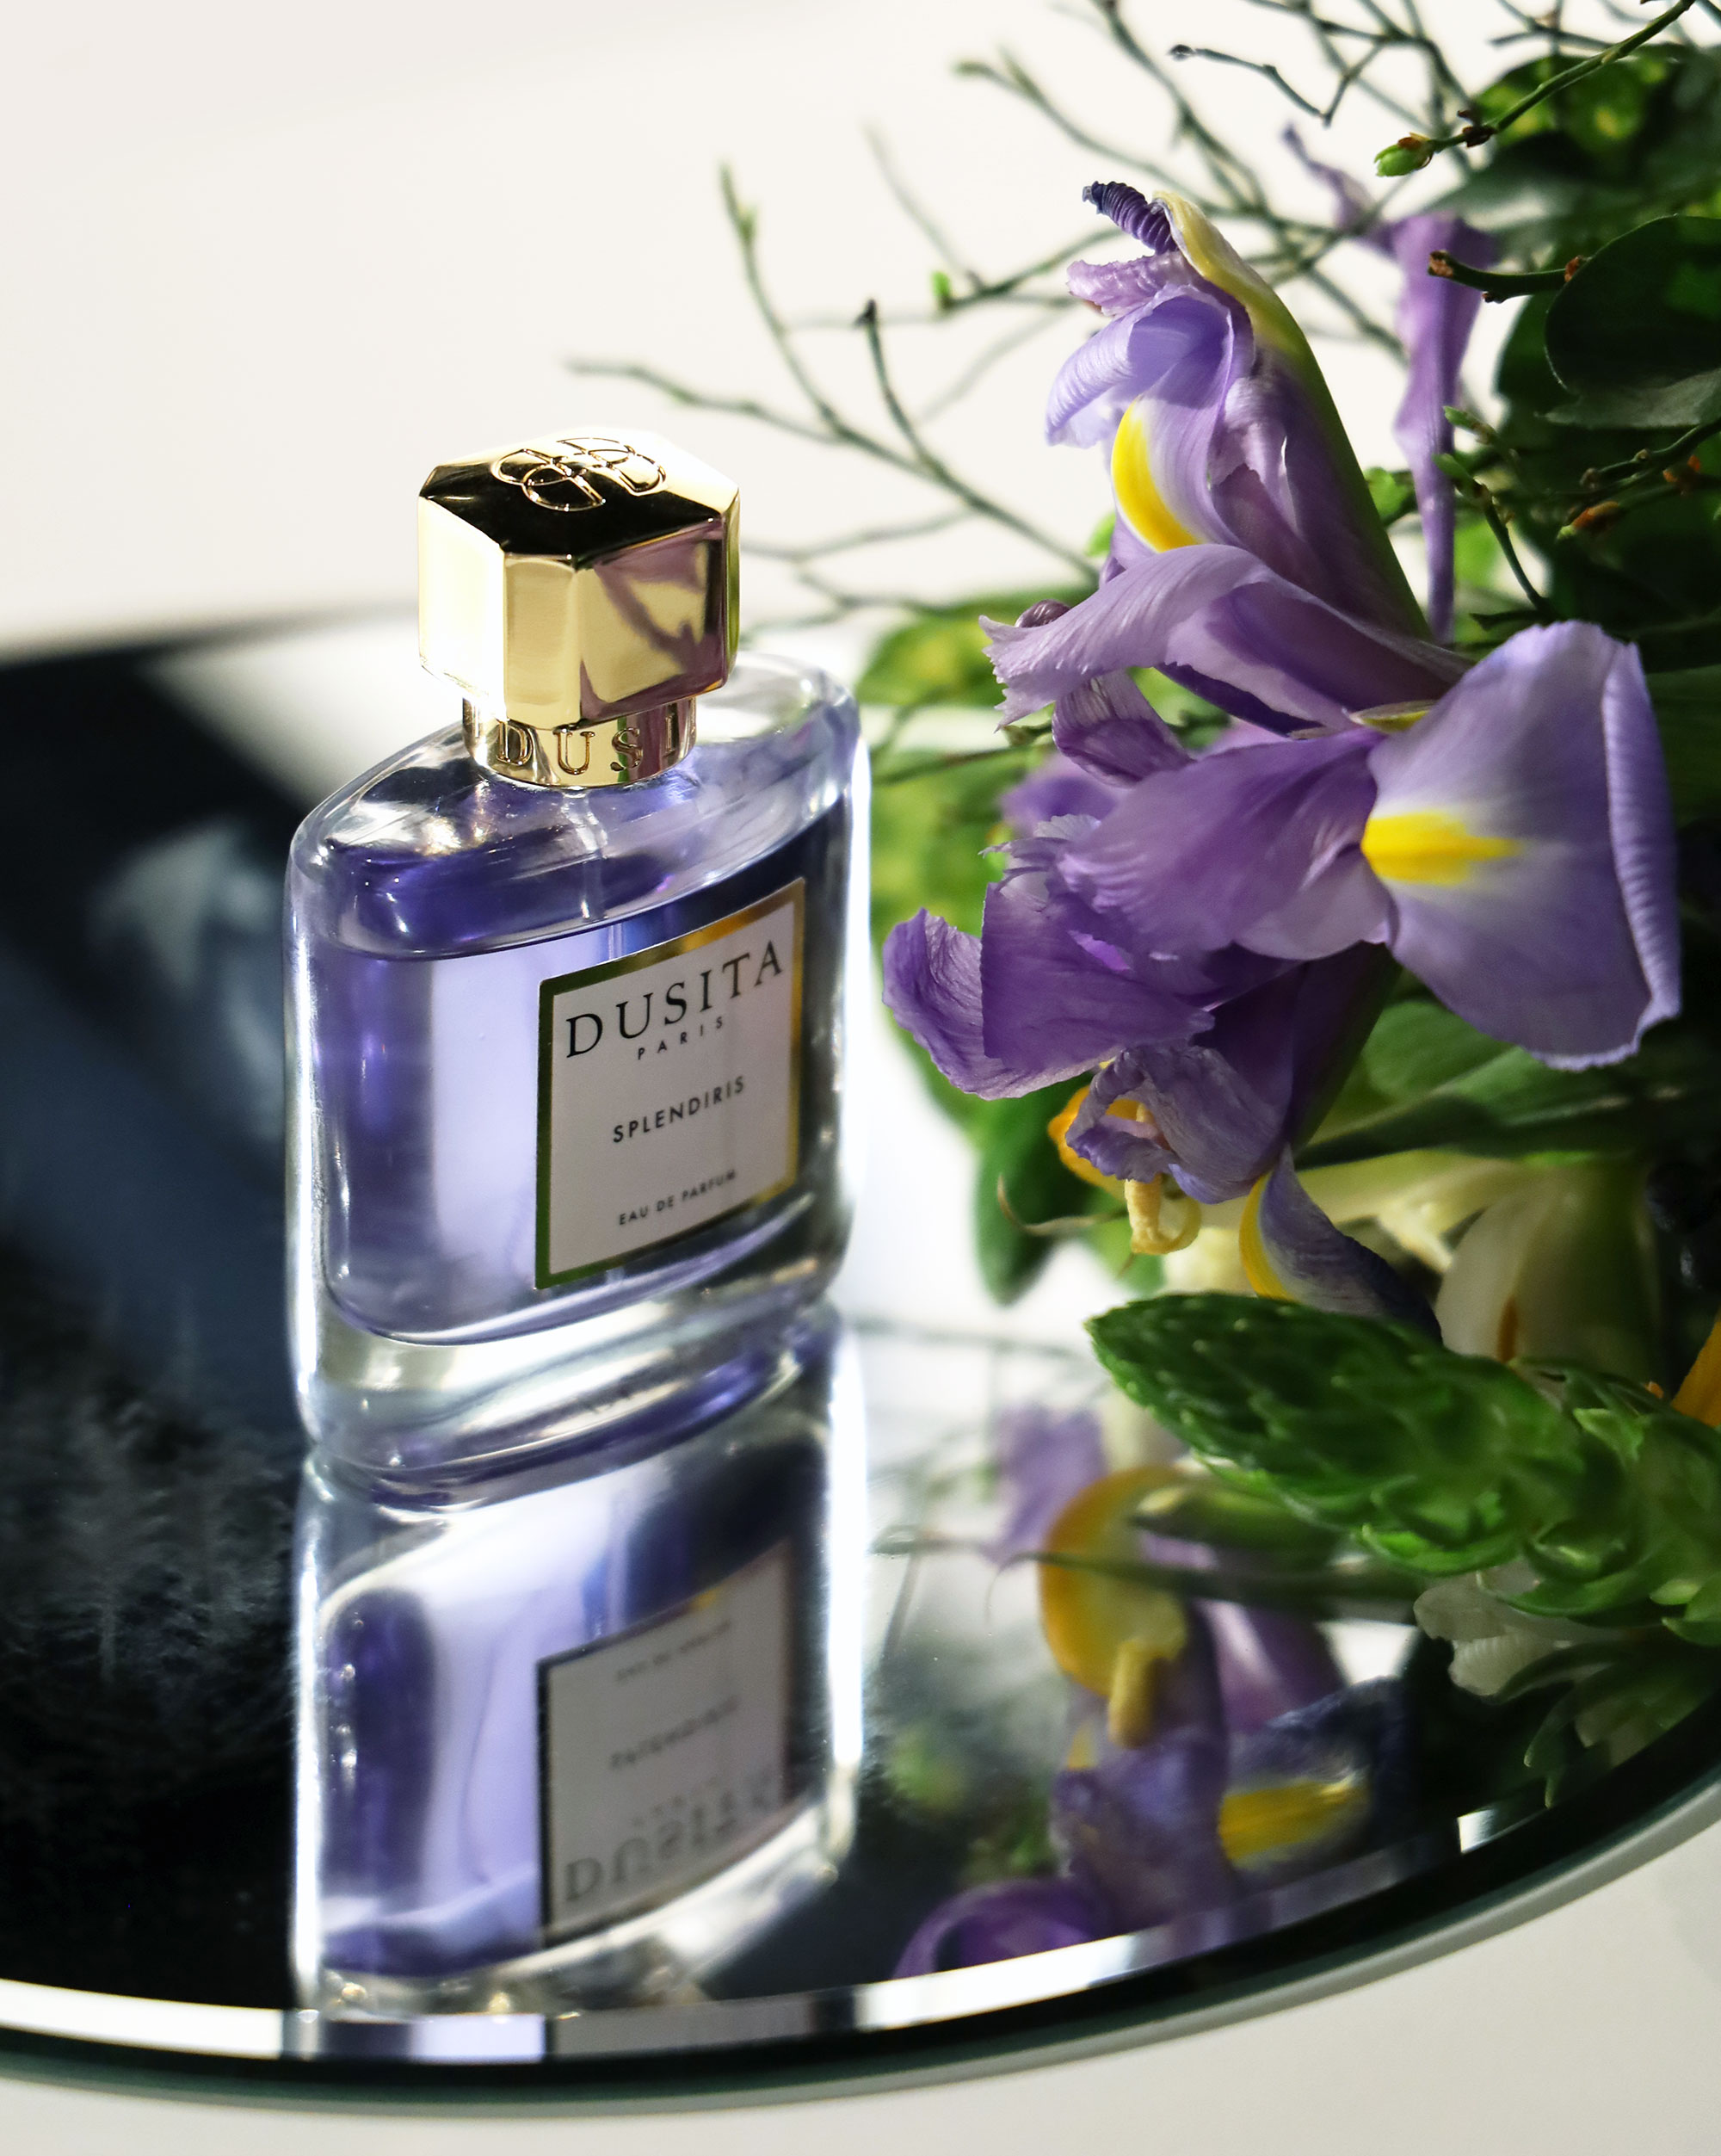 Floral Fragrances at ESXENCE 2019: A Garden of Many Exquisite Flowers ...